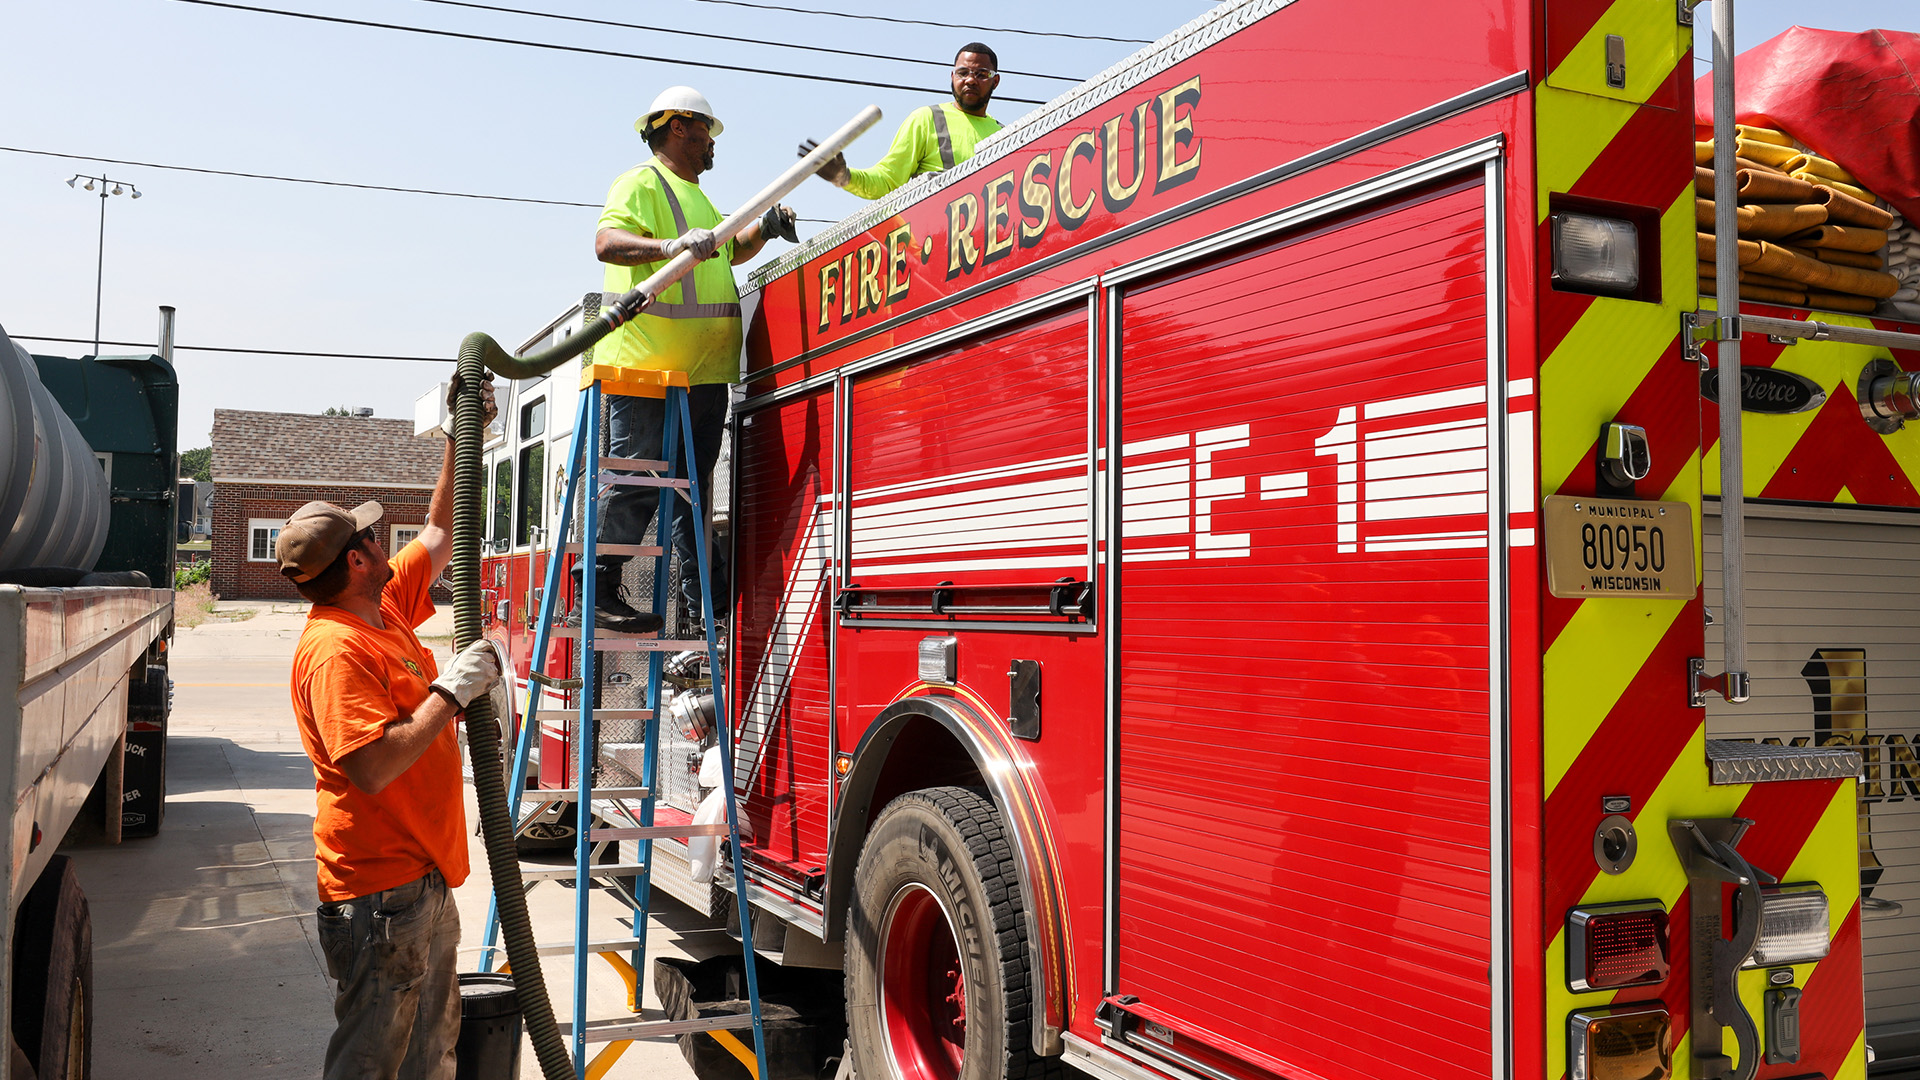 Dan Bice holds a flexible corrugated plastic hose up to Tyrone Rogers, who is standing on a folding ladder placed next to a fire and rescue truck, with Trent Thomas on its top holding its nozzle, with another truck parked to the side and a building and power lines in the background.